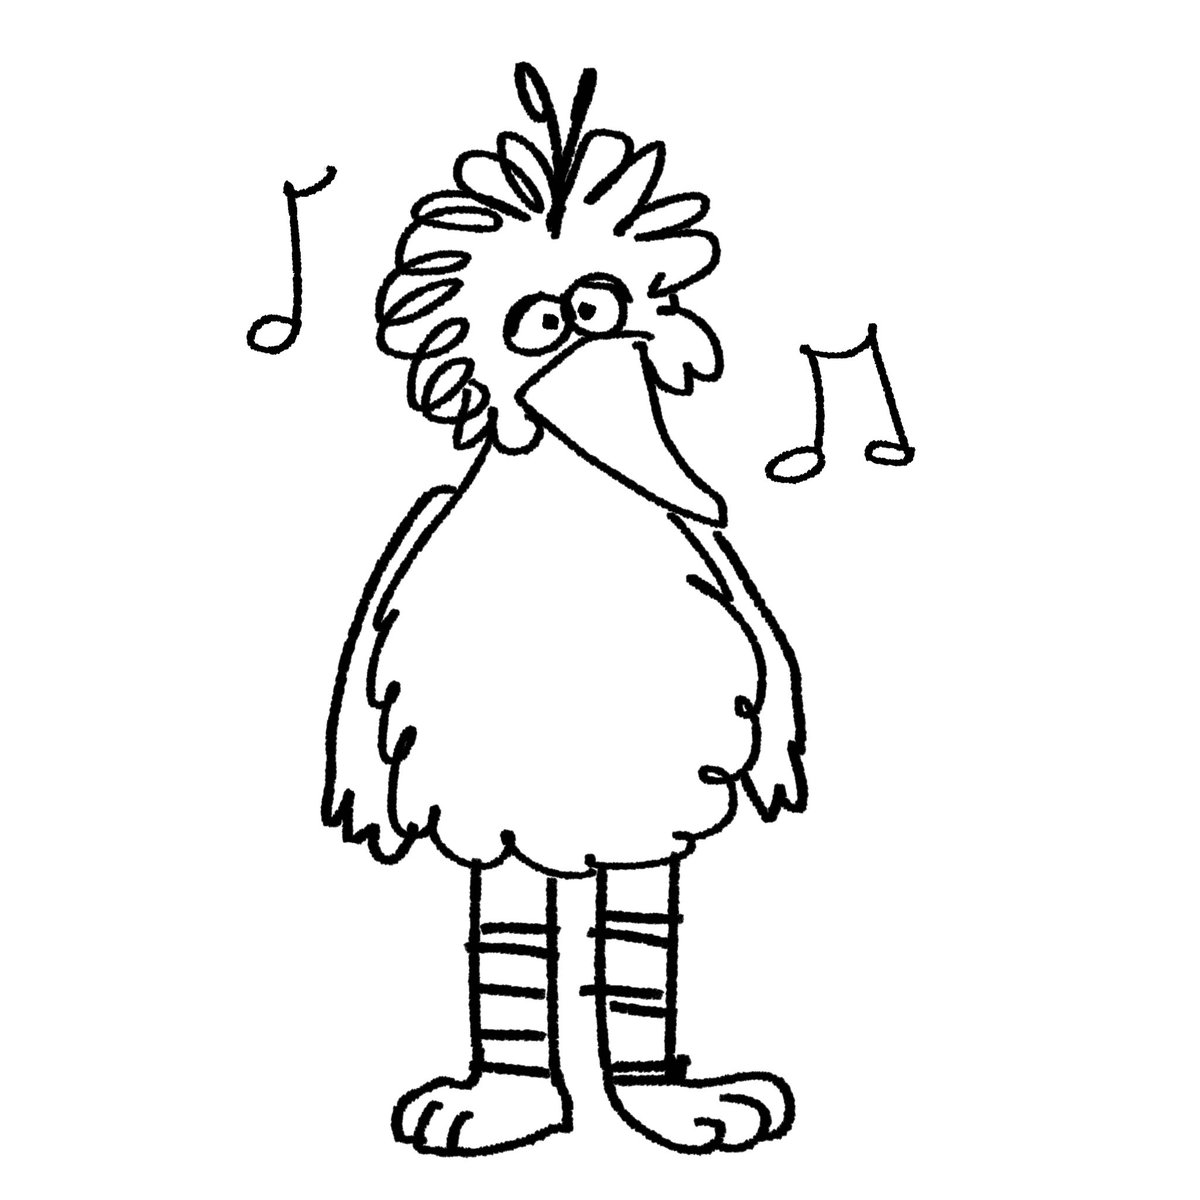 trying #MuppetationalMay, but giving myself 60 seconds to complete each drawing on my phone. day 19: Big Bird